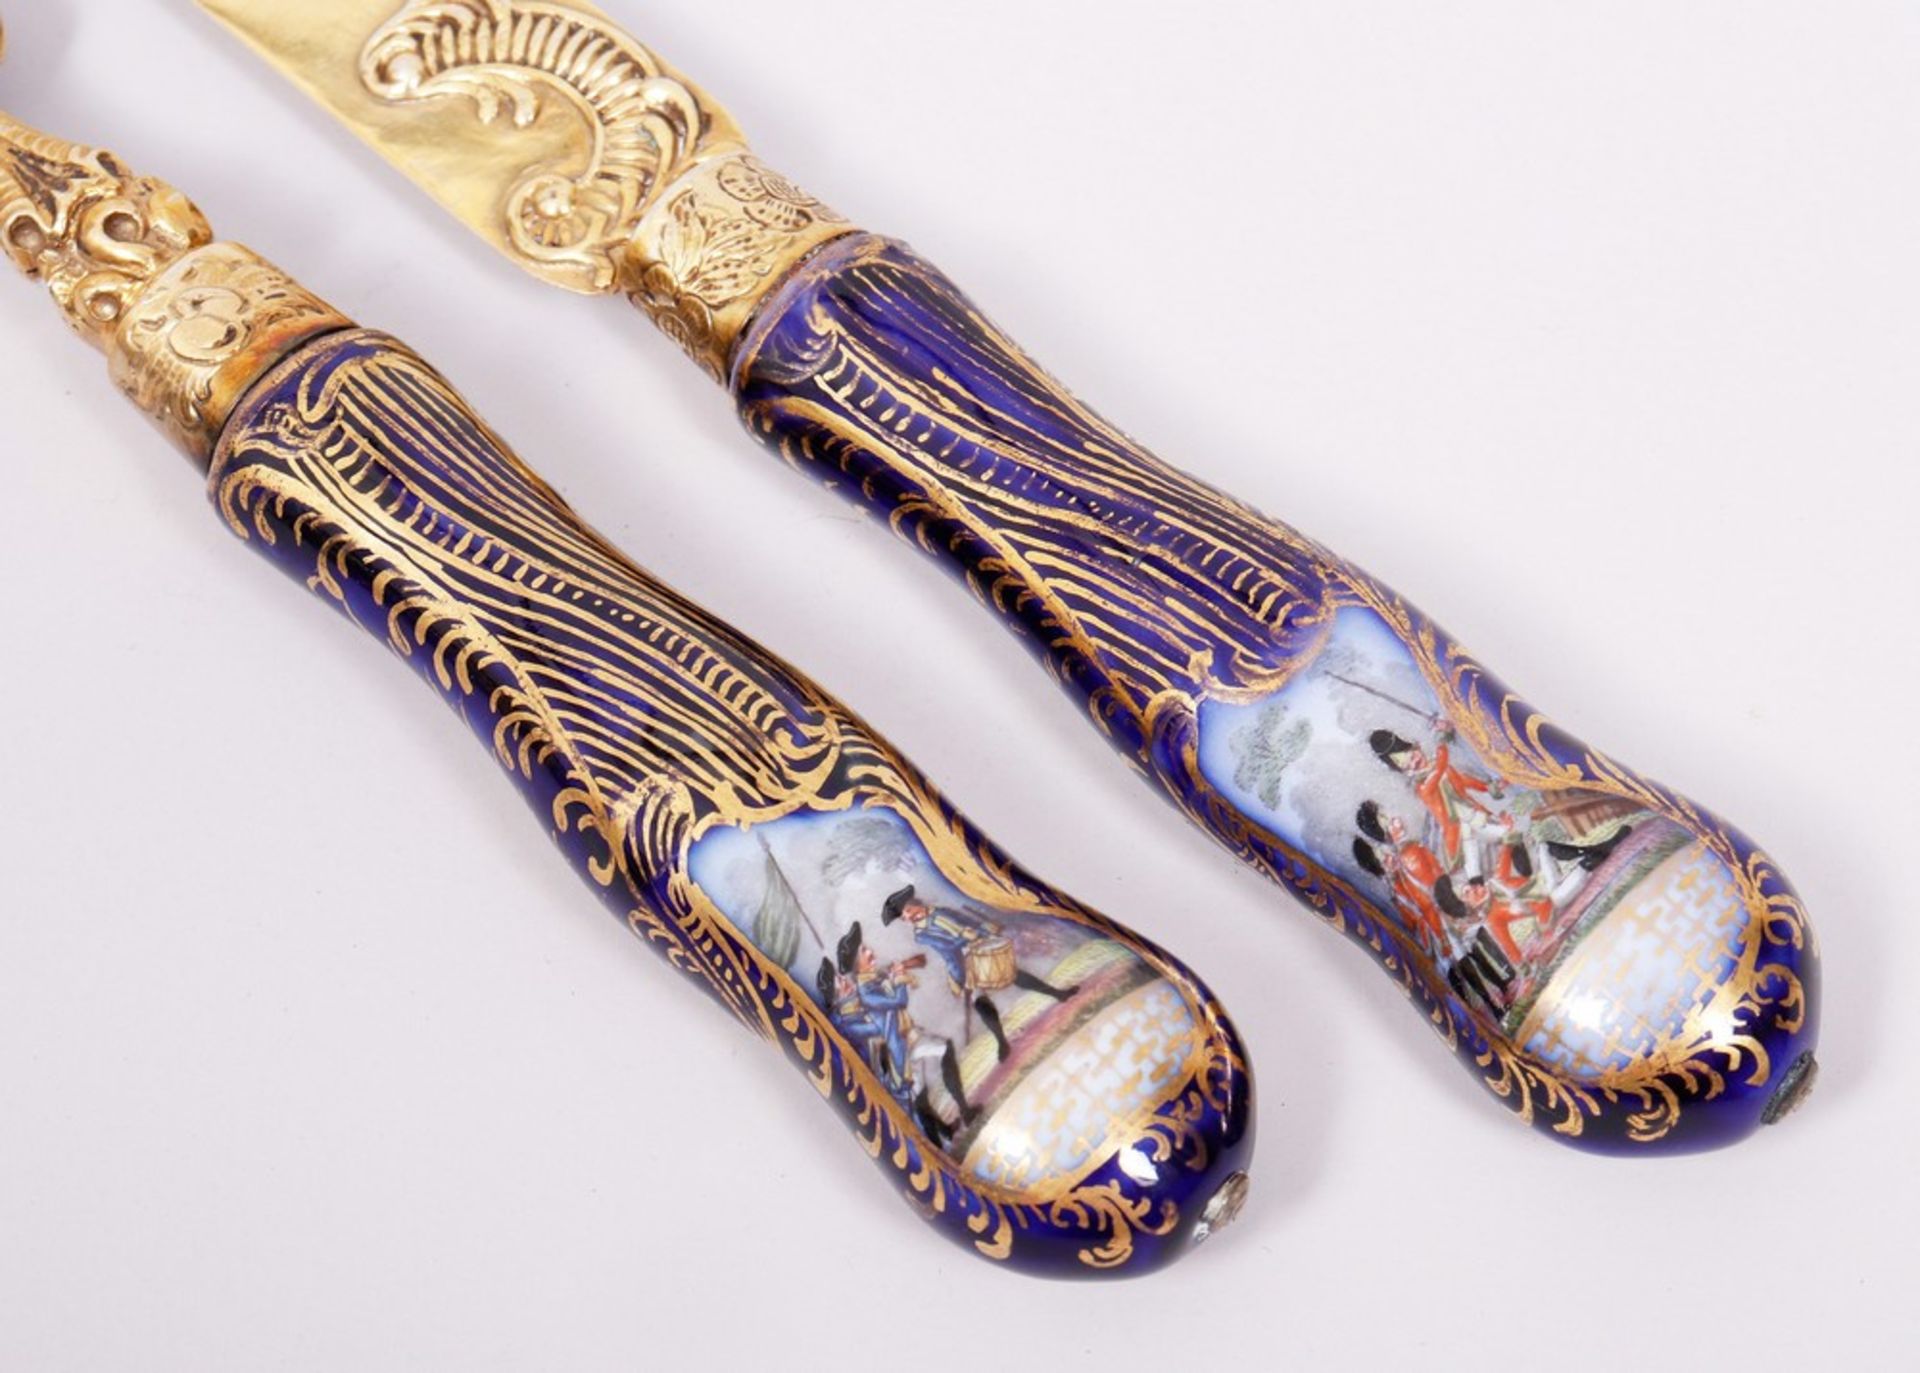 Late Baroque dining knife and fork, silver/gilt, probably German, mid-18th C. - Image 3 of 5